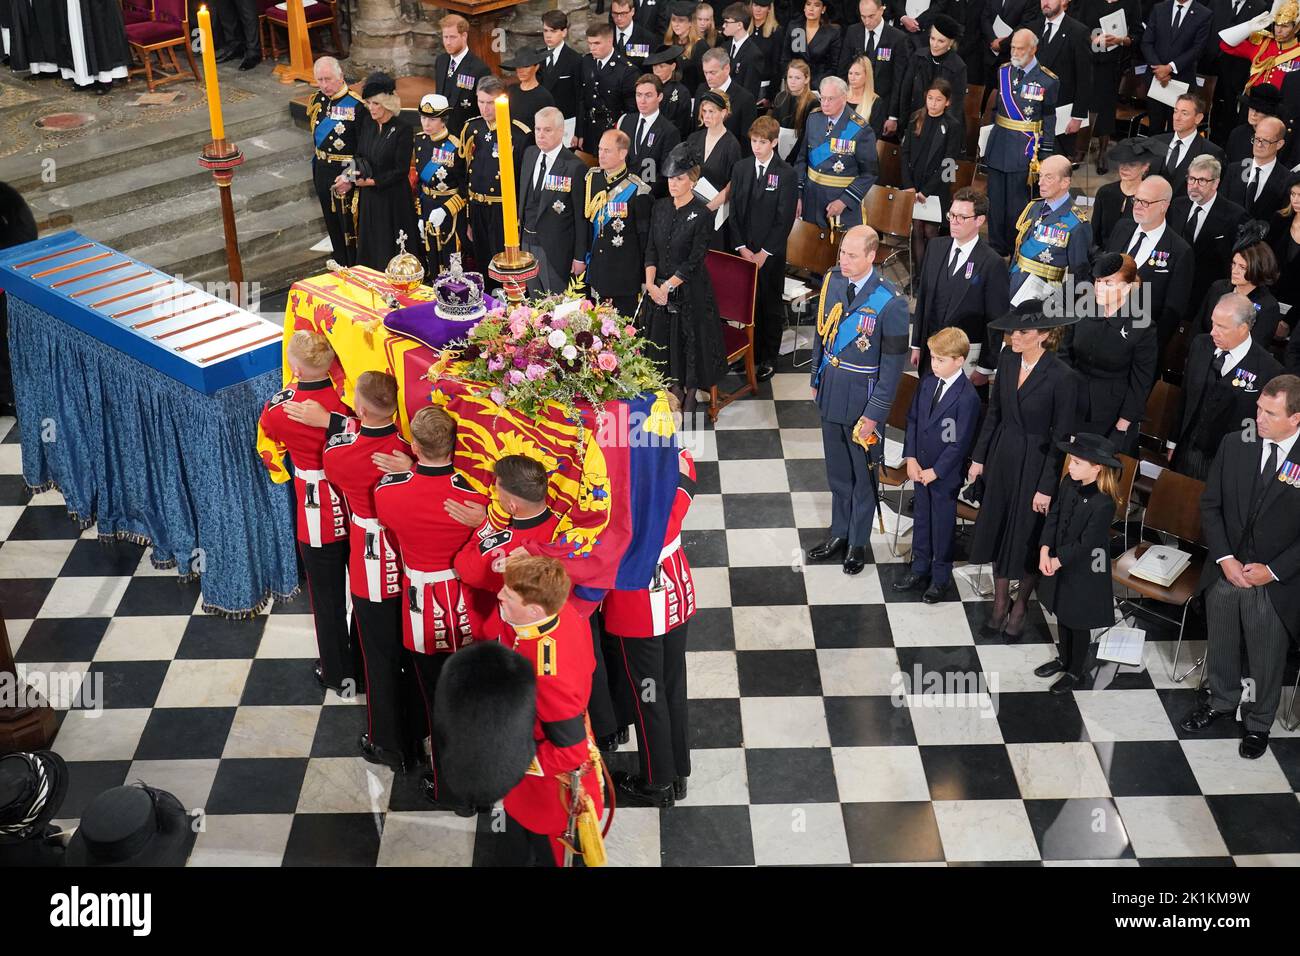 The coffin of Queen Elizabeth II, draped in the Royal Standard with the Imperial State Crown and the Sovereign's Orb and Sceptre, is carried by the Bearer Party the royal family look on (front row) King Charles III, the Queen Consort, the Princess Royal, Vice Admiral Sir Tim Laurence, the Duke of York, the Earl of Wessex, the Countess of Wessex, the Prince of Wales, Prince George, the Princess of Wales, Princess Charlotte, Peter Phillips, (second row) the Duke of Sussex, the Duchess of Sussex, Princess Beatrice, Edoardo Mapelli Mozzi and Lady Louise Windsor, James, Viscount Severn, Jack Brooks Stock Photo